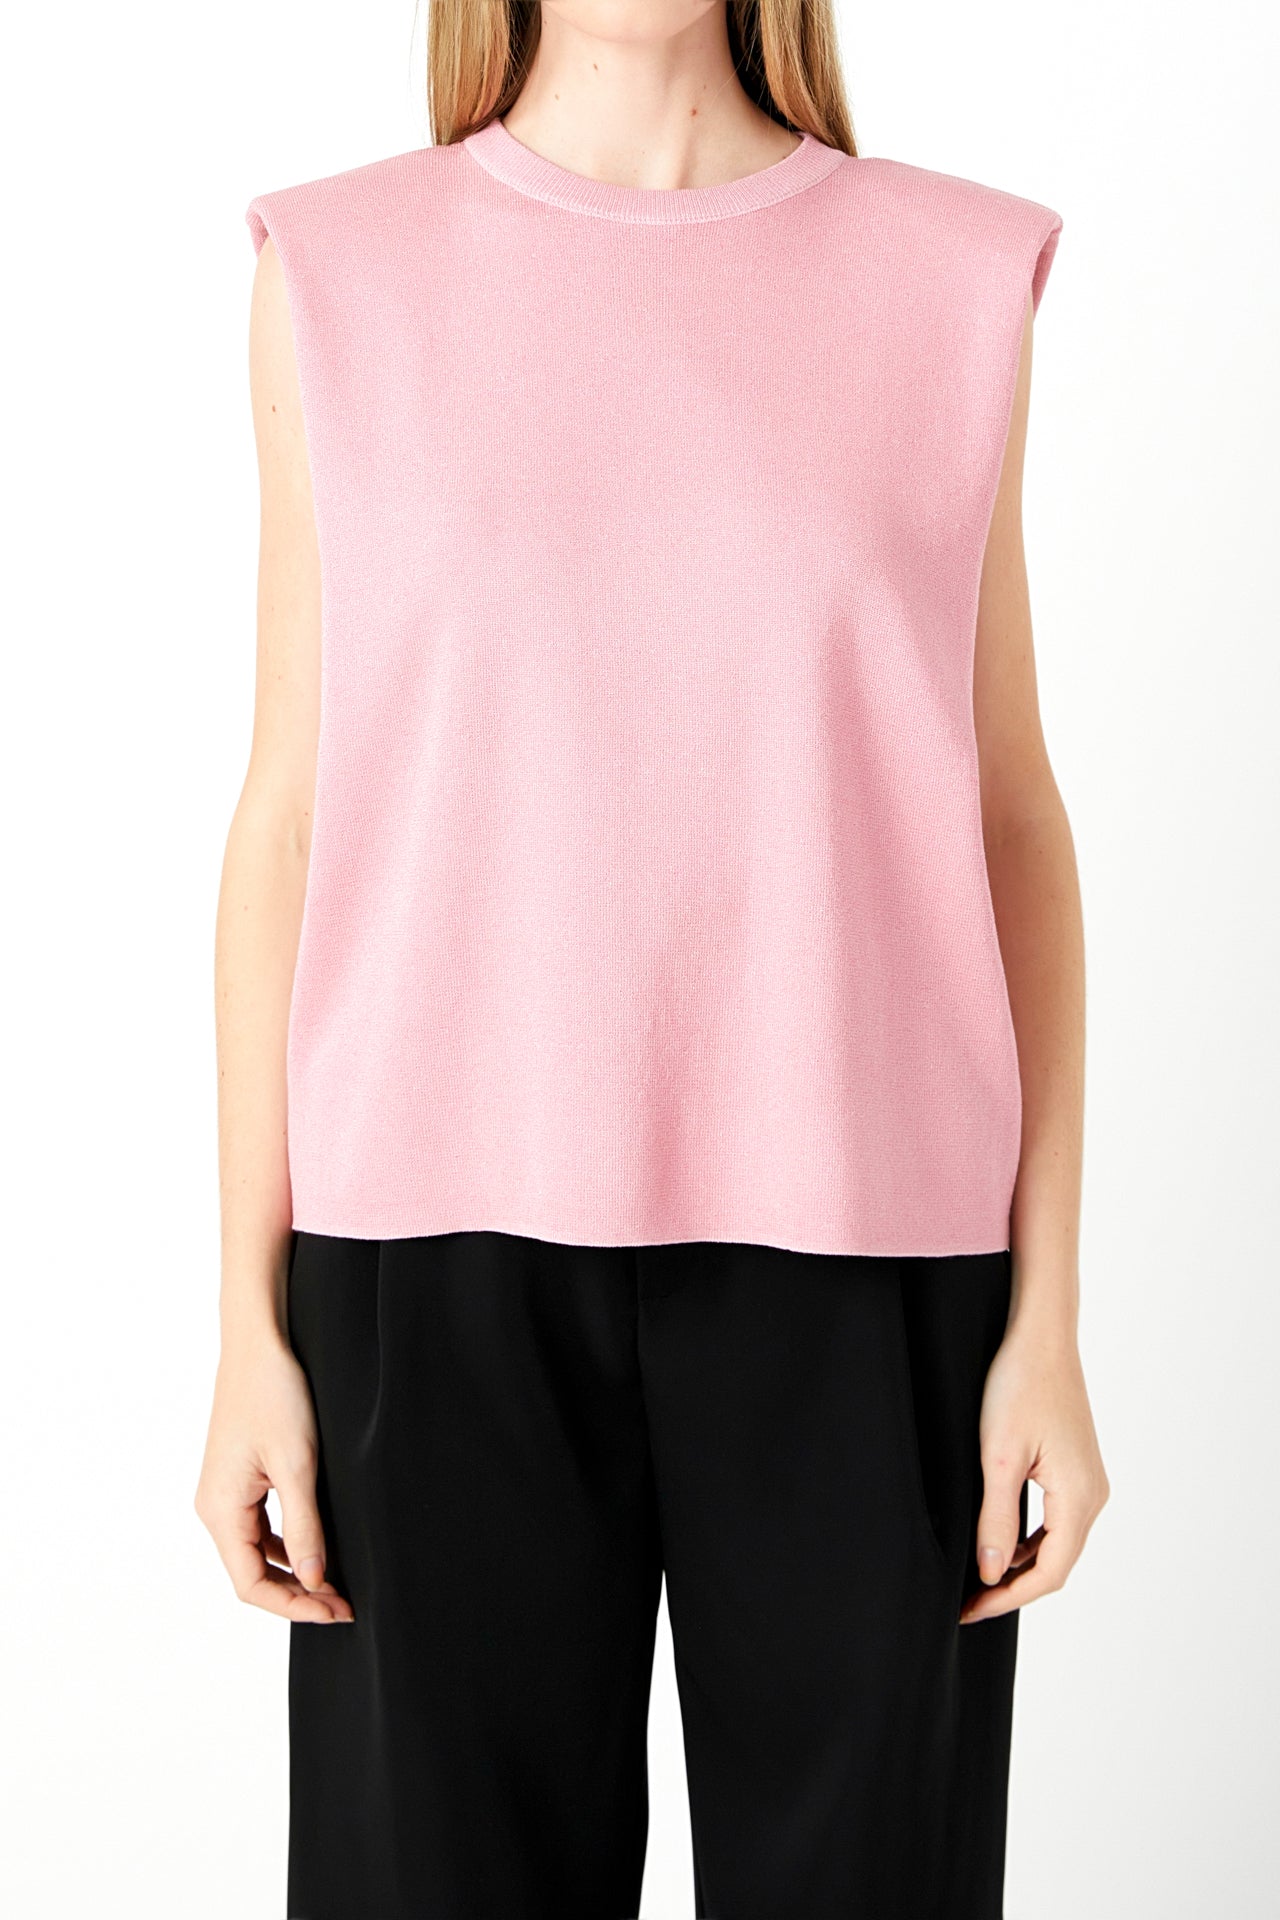 ENDLESS ROSE - Glitter Power Shoulder Knit Top - TOPS available at Objectrare